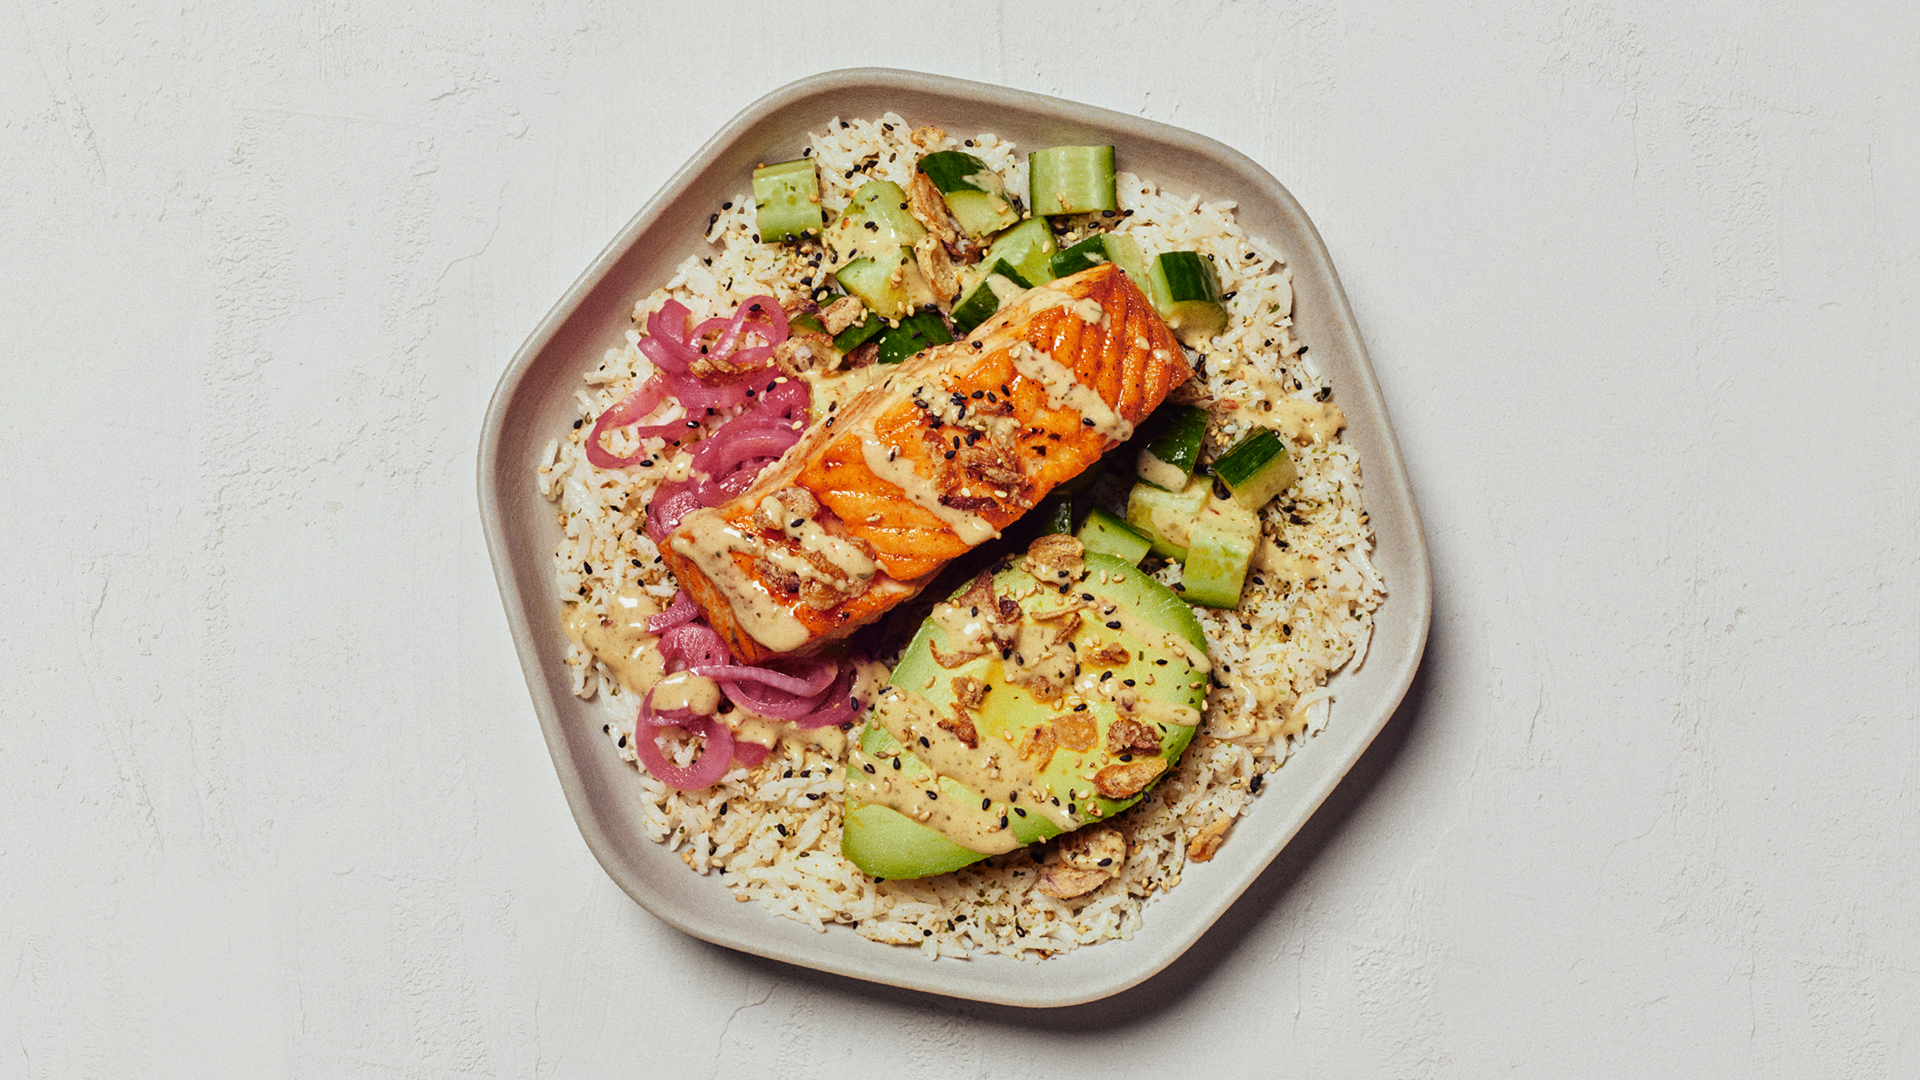 A hexagonal plate of a filet of salmon and an avocado, served on rice and drizzled with sauce